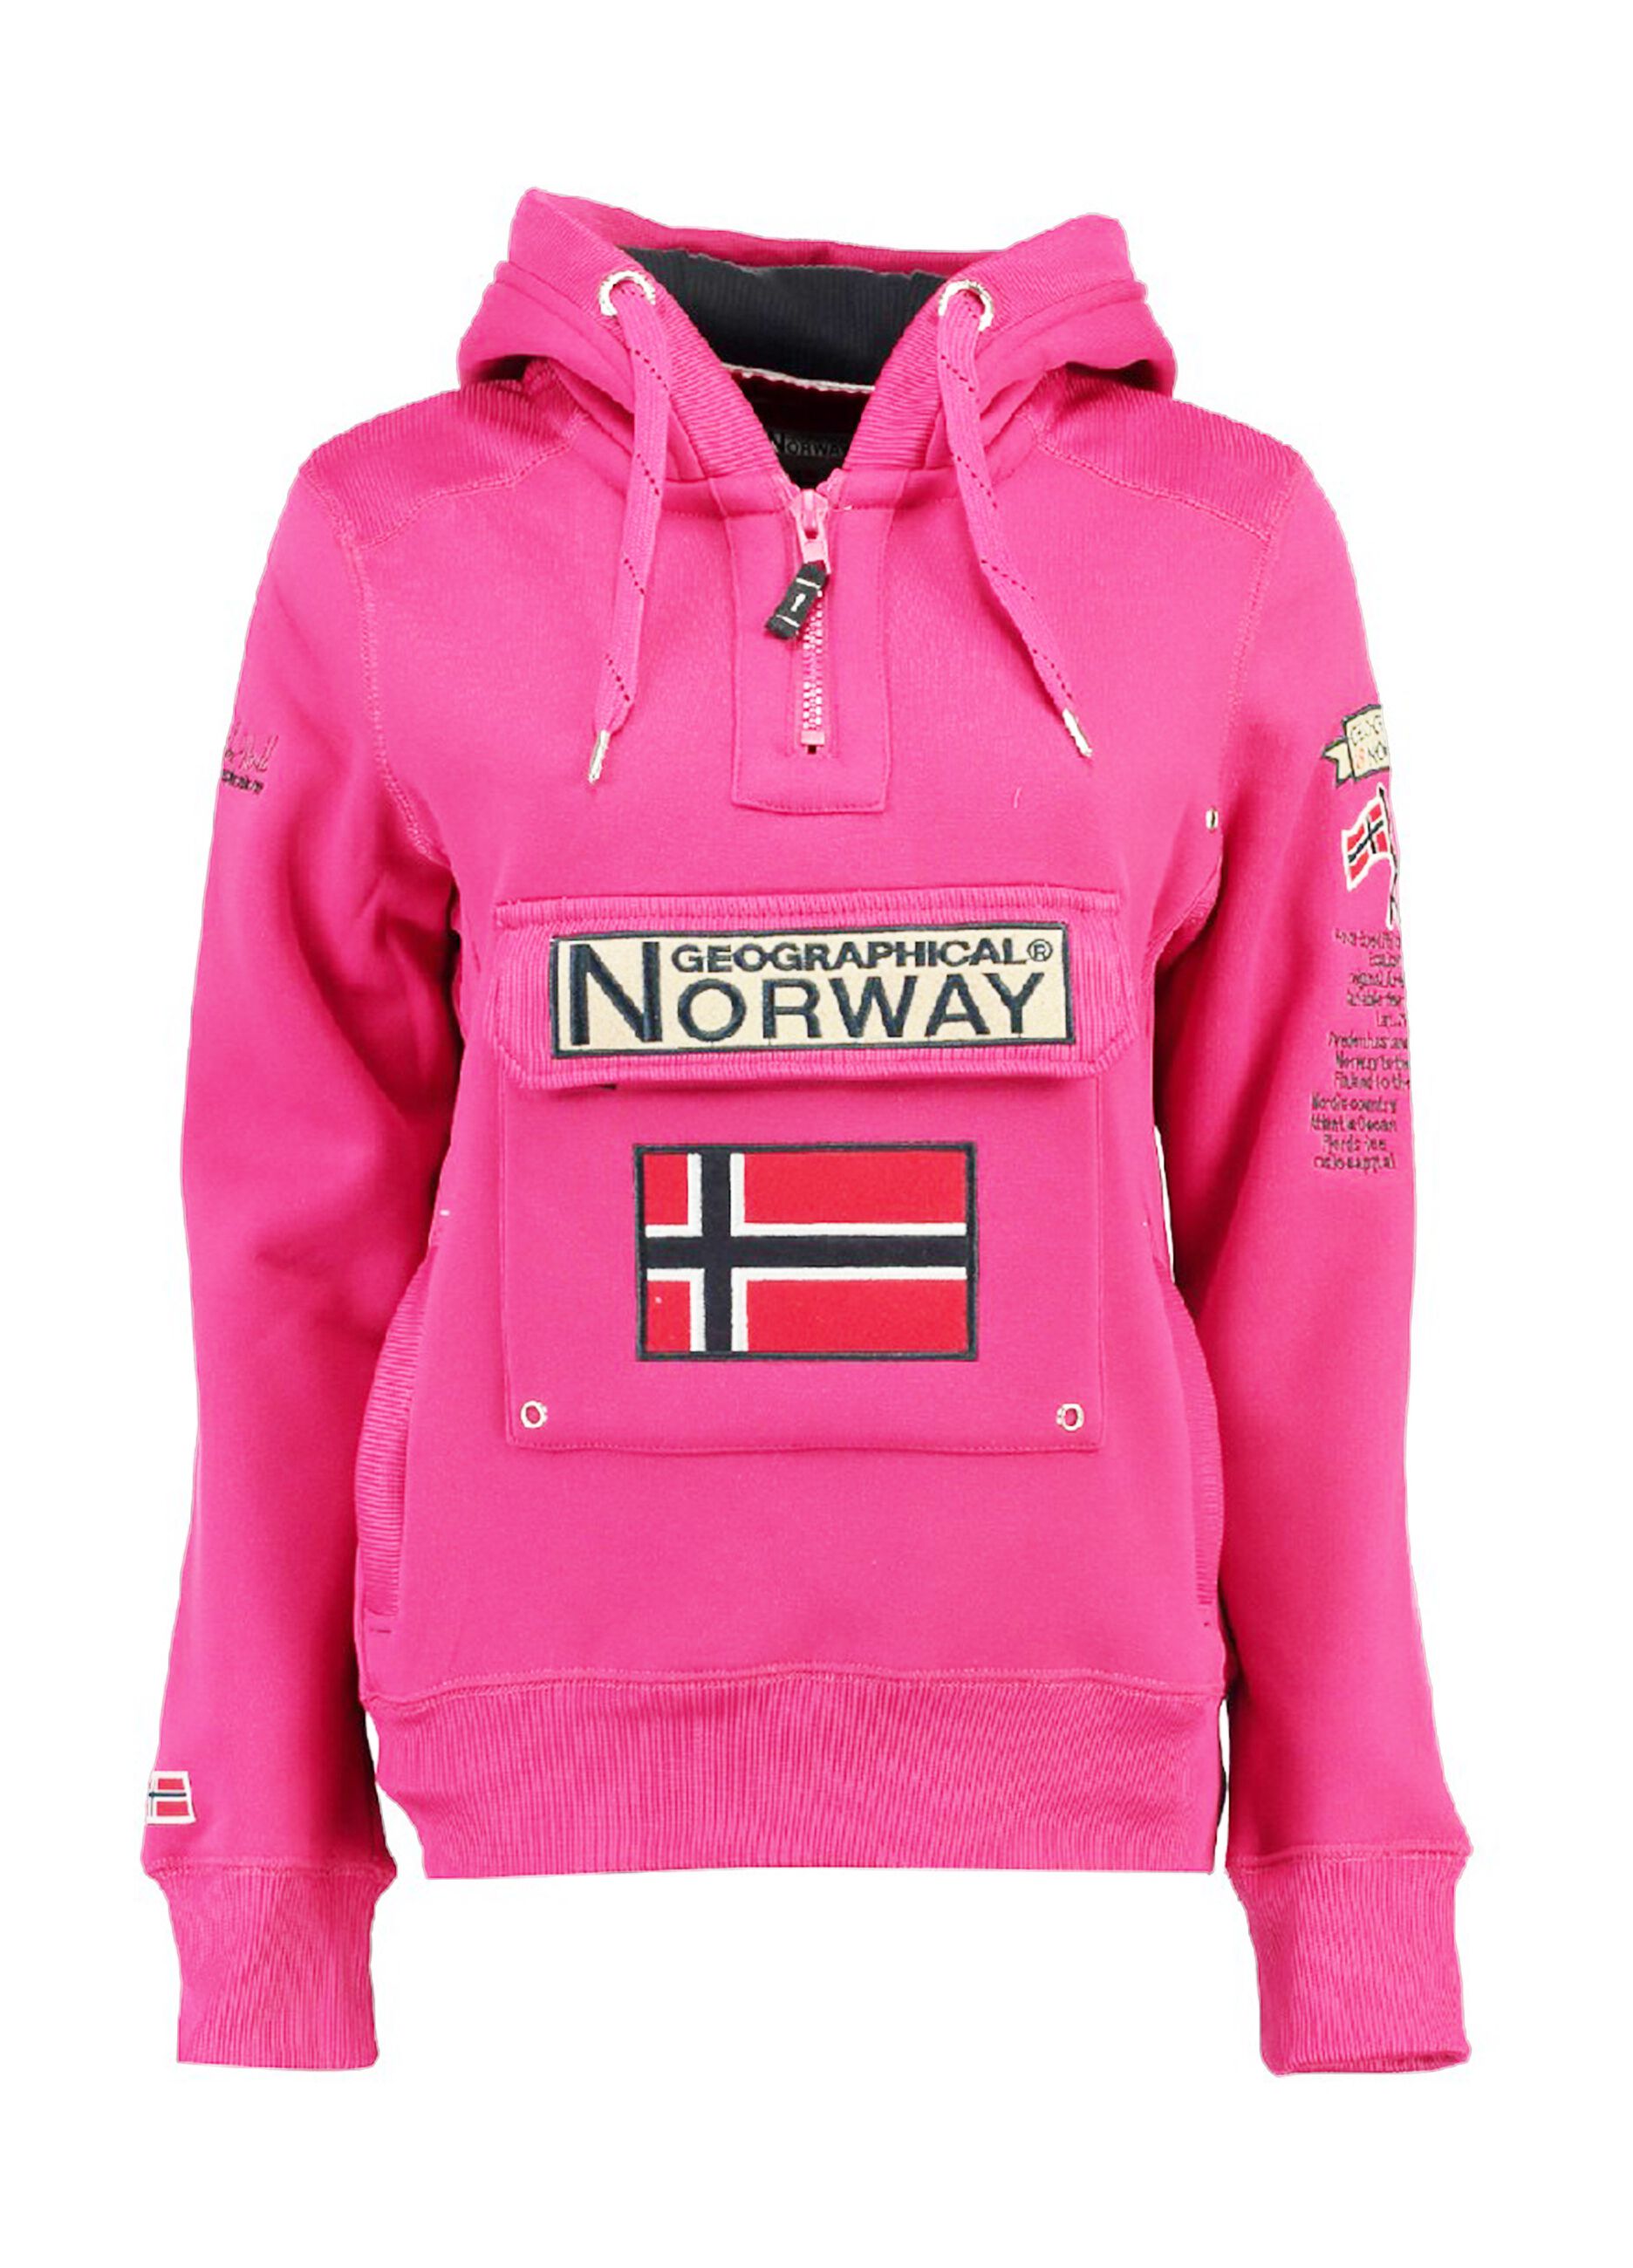 GEOGRAPHICAL NORWAY Teen Boy's Fuchsia Geographical Norway half